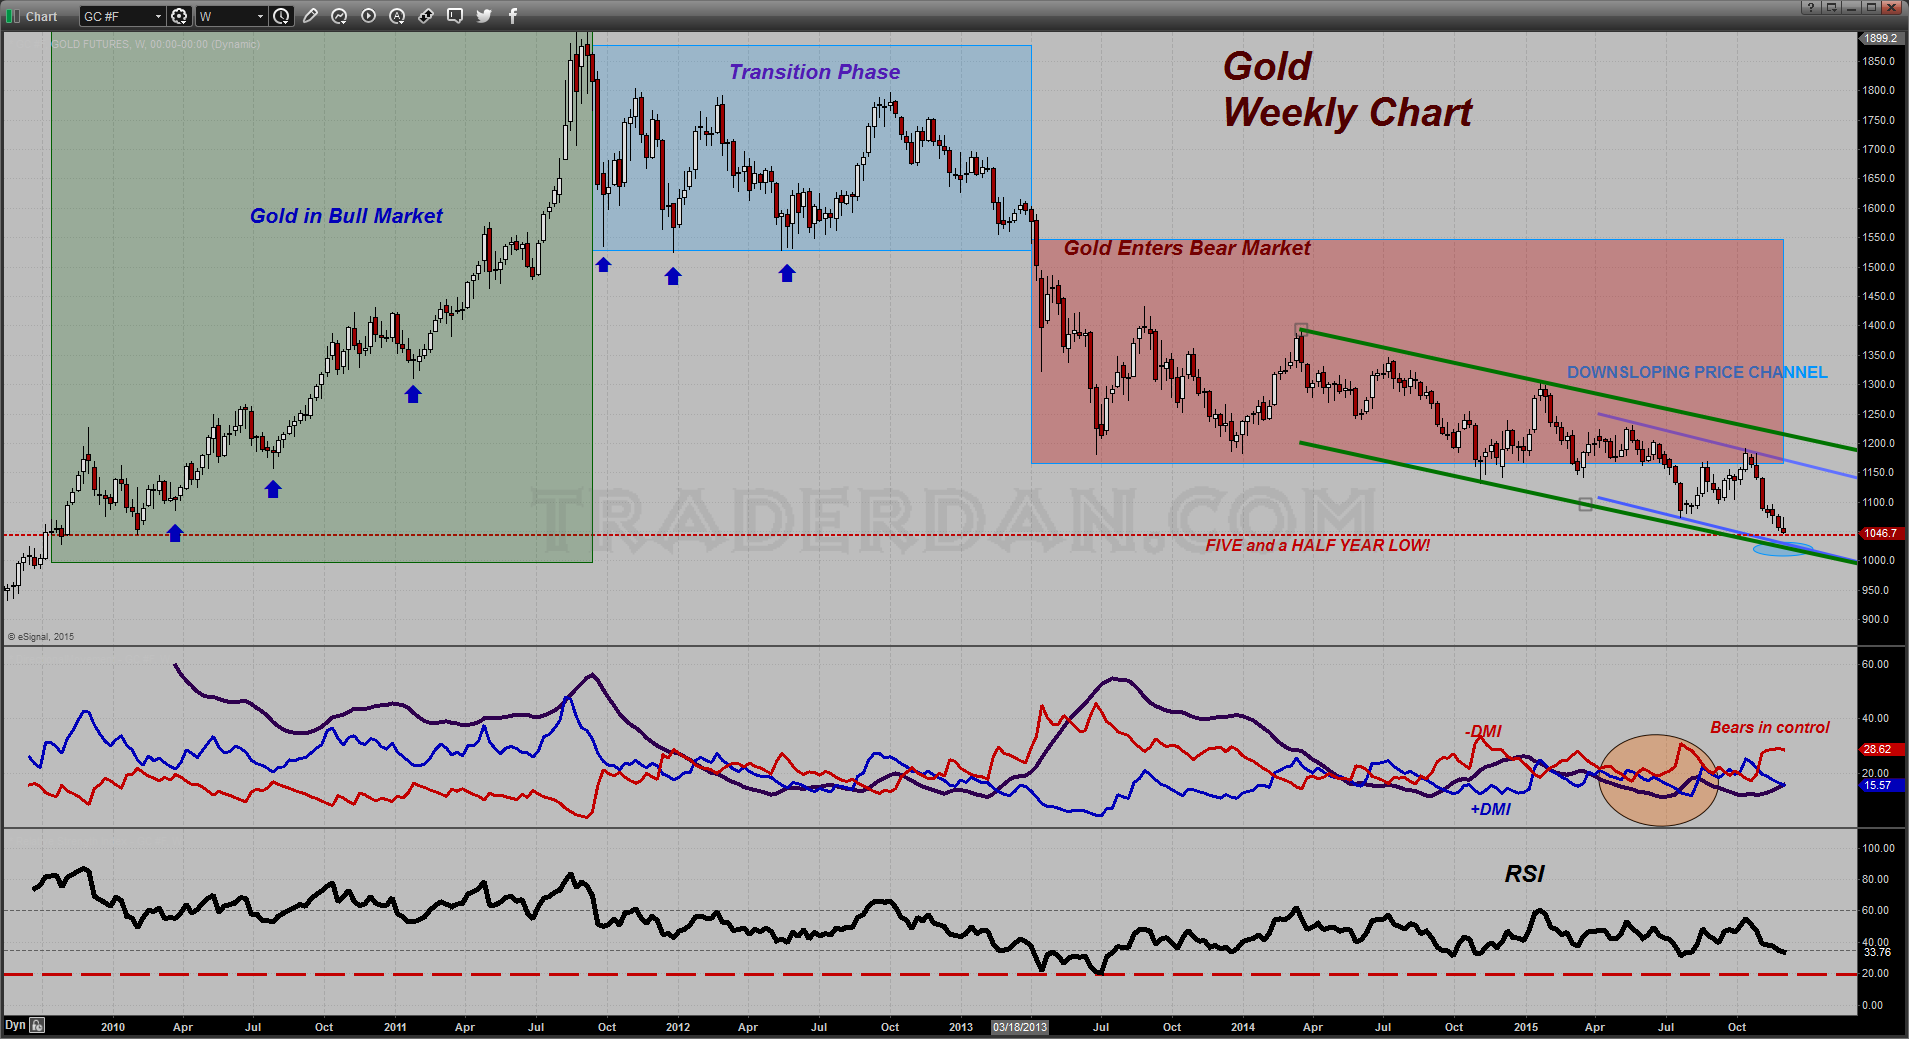 Gold Weekly 2009-2015